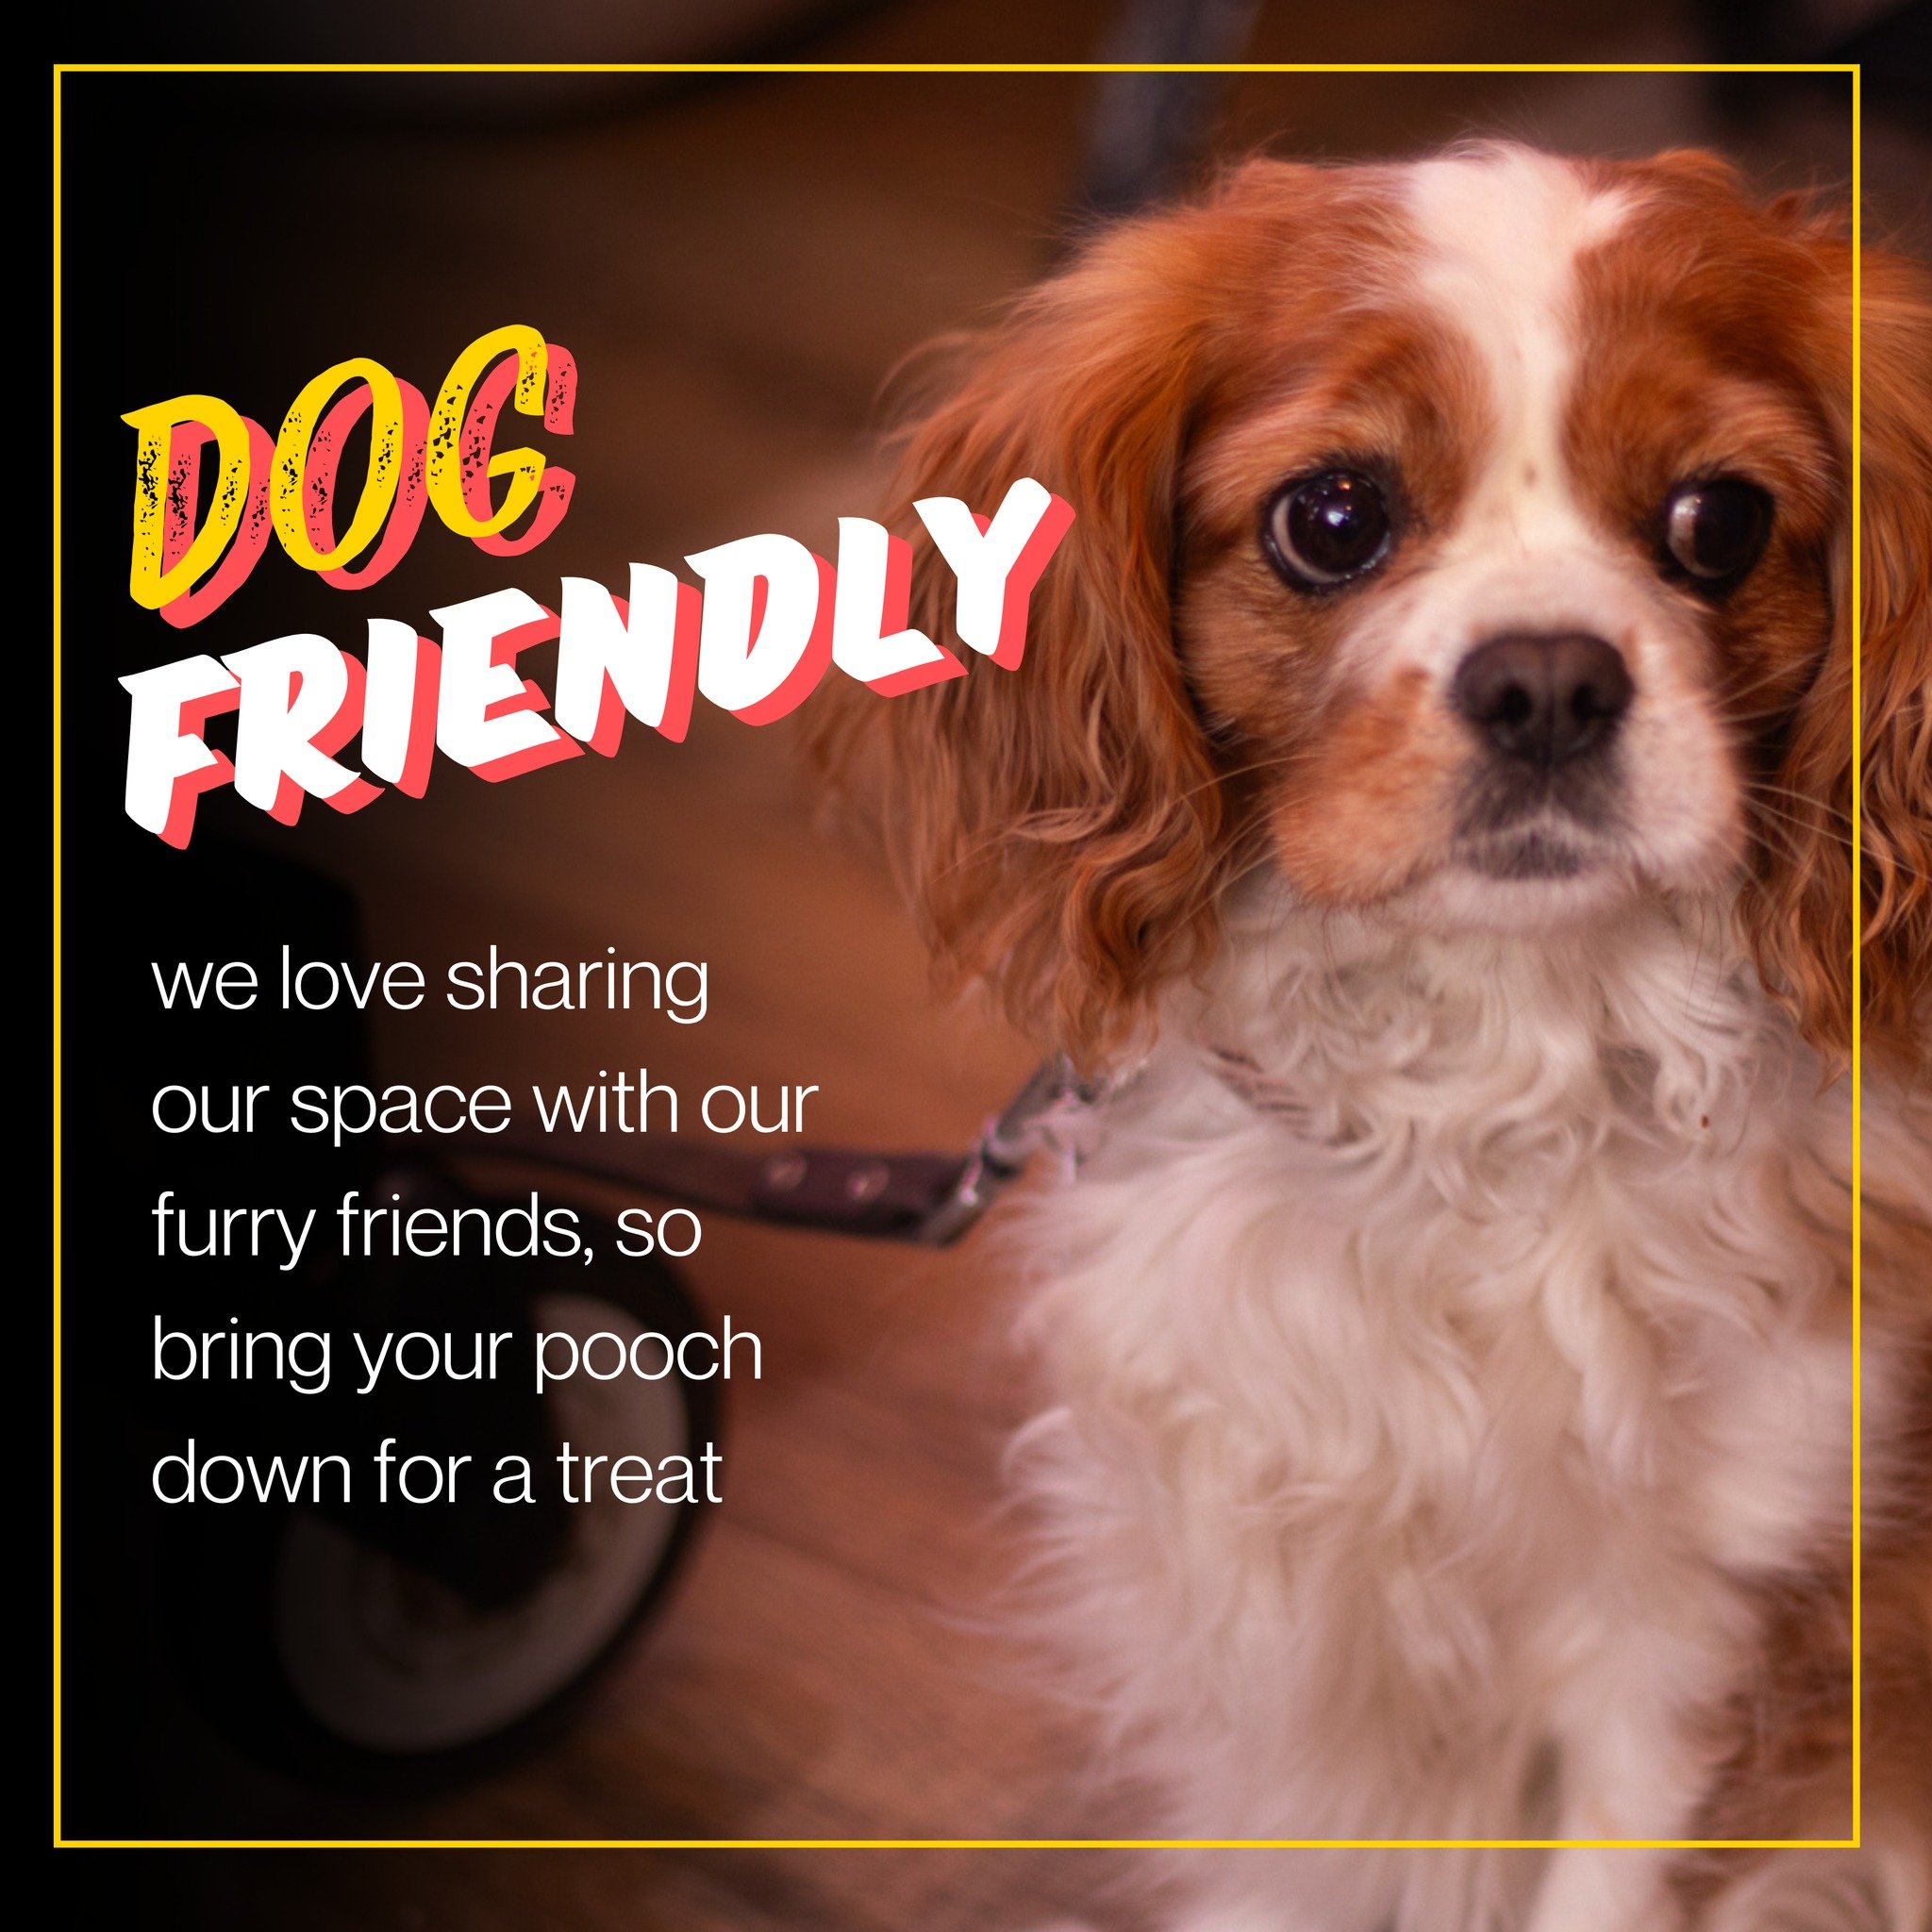 We welcome you and your furry friend to our cosy dog-friendly cafe where you can enjoy a delicious treat together 🐾🍰 Relax with your pup and indulge in some yummy snacks! 

#DogFriendlyCafe #PamperYourPup #bristol #coffeelover #perfecto